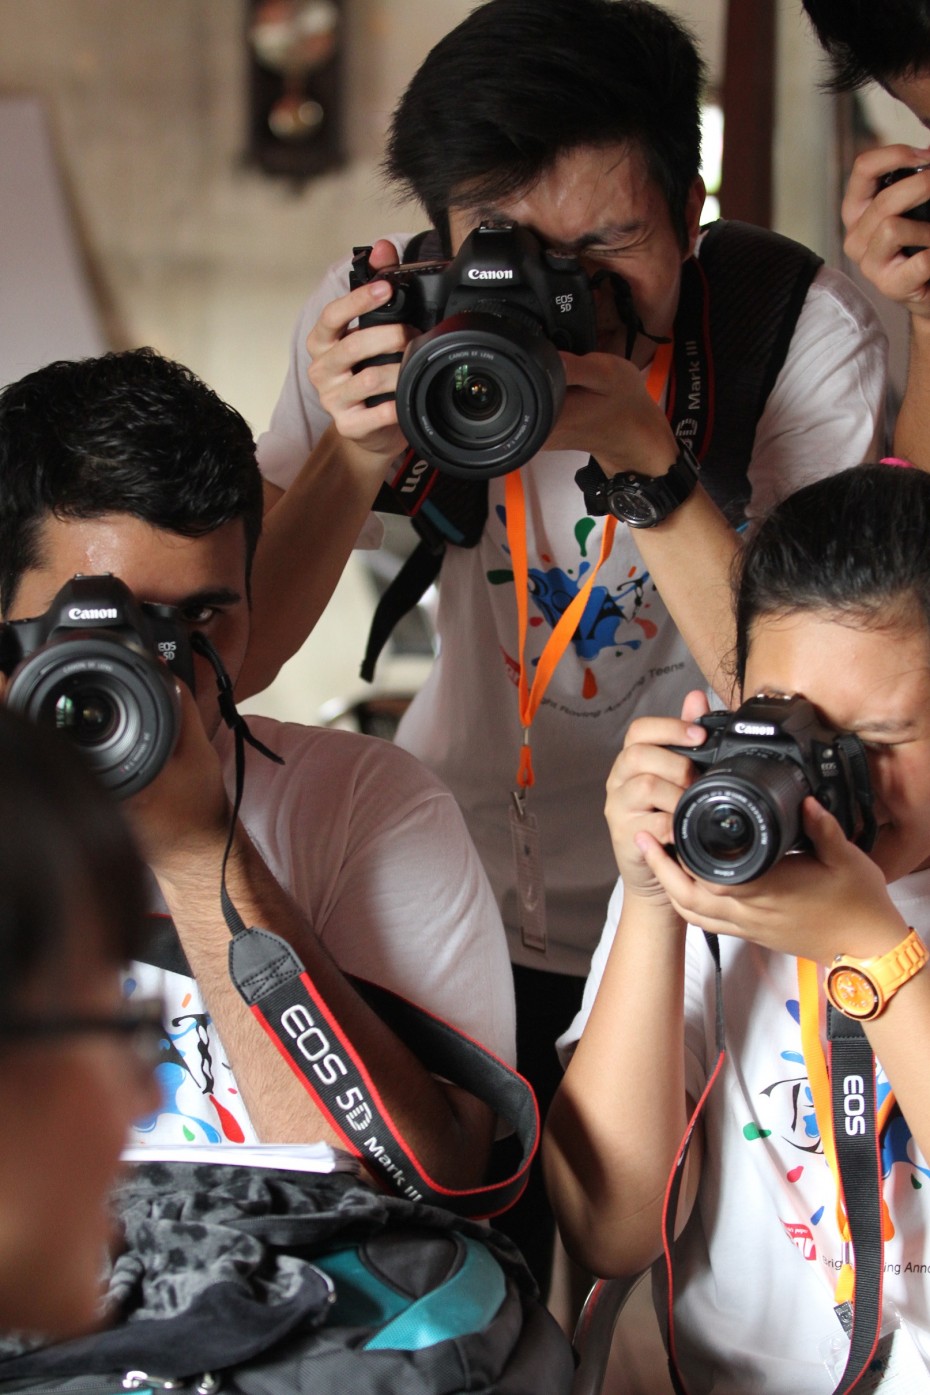 Some of the participants putting their new-found photojournalism skills to the test.